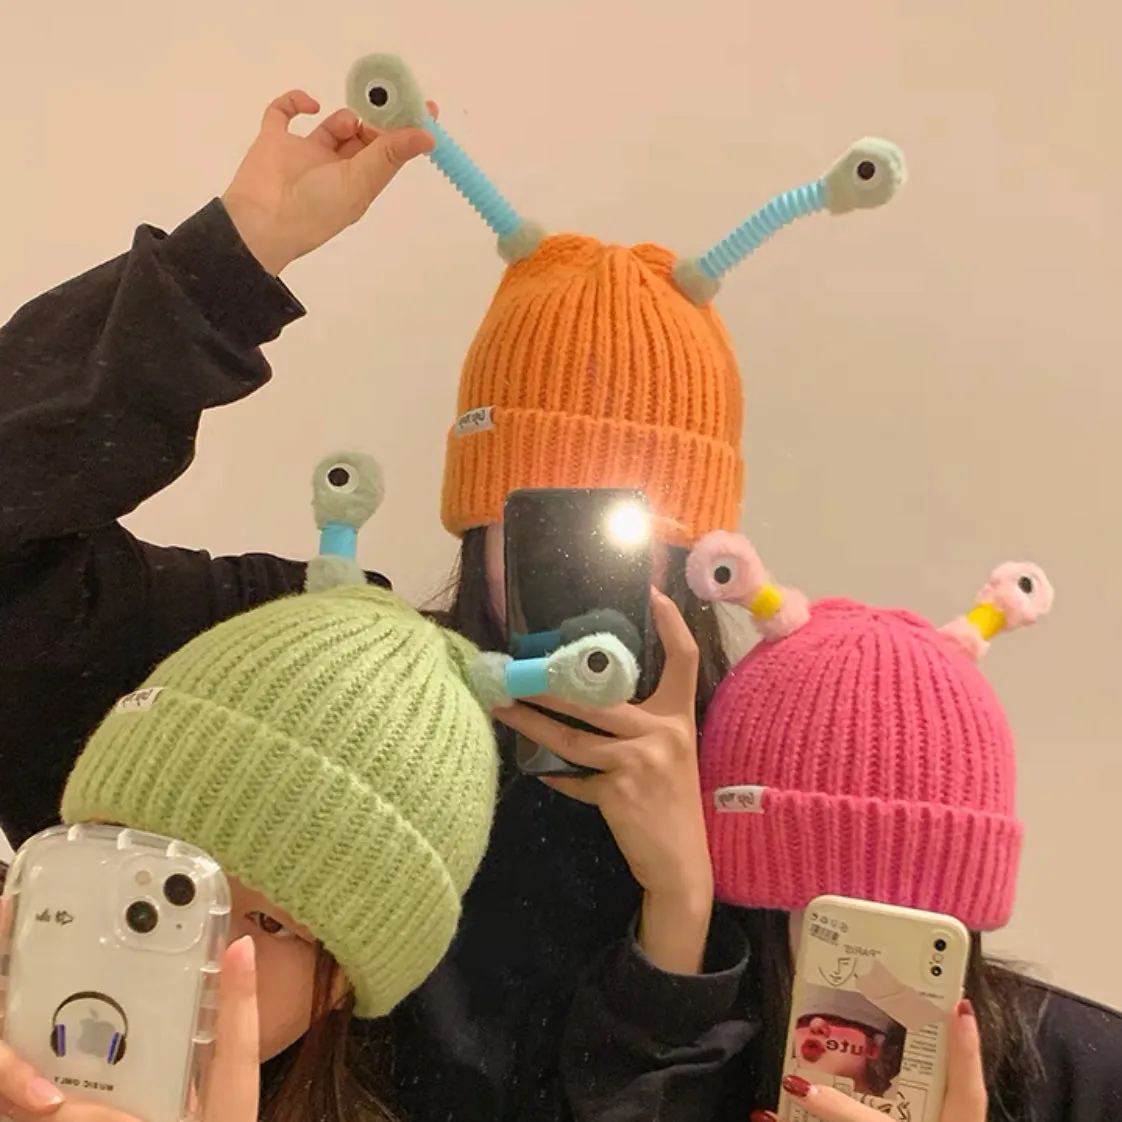 🔥HOT SALE - 49% OFF🔥Child Cute Glowing Little Monster Knit Hat